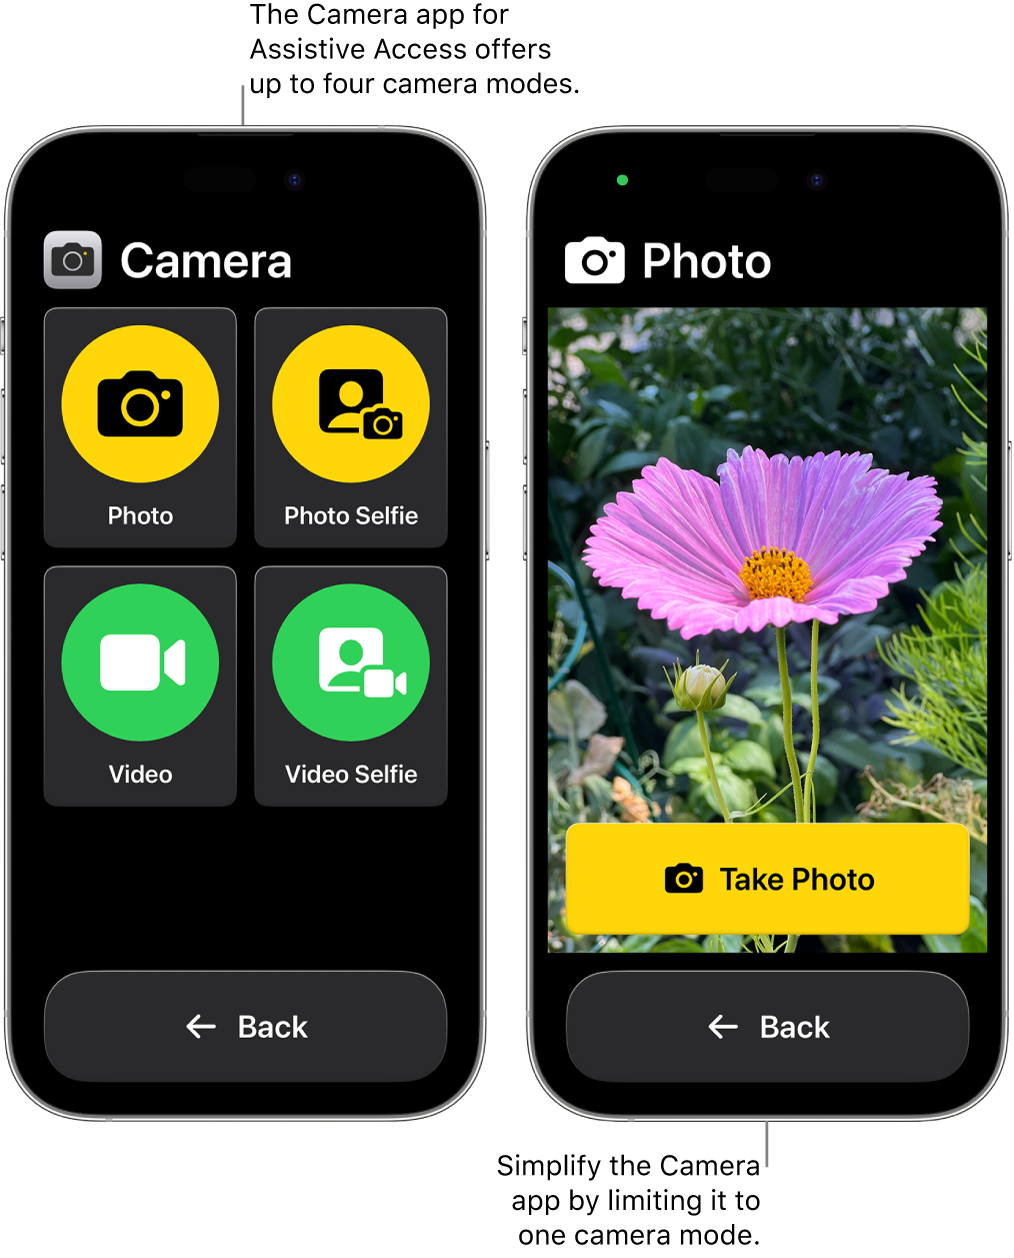 Two iPhones in Assistive Access. One iPhone shows the Camera app with camera modes for the user to choose from, like Video or Photo Selfie. The other iPhone shows the Camera app with a single mode for taking photos.